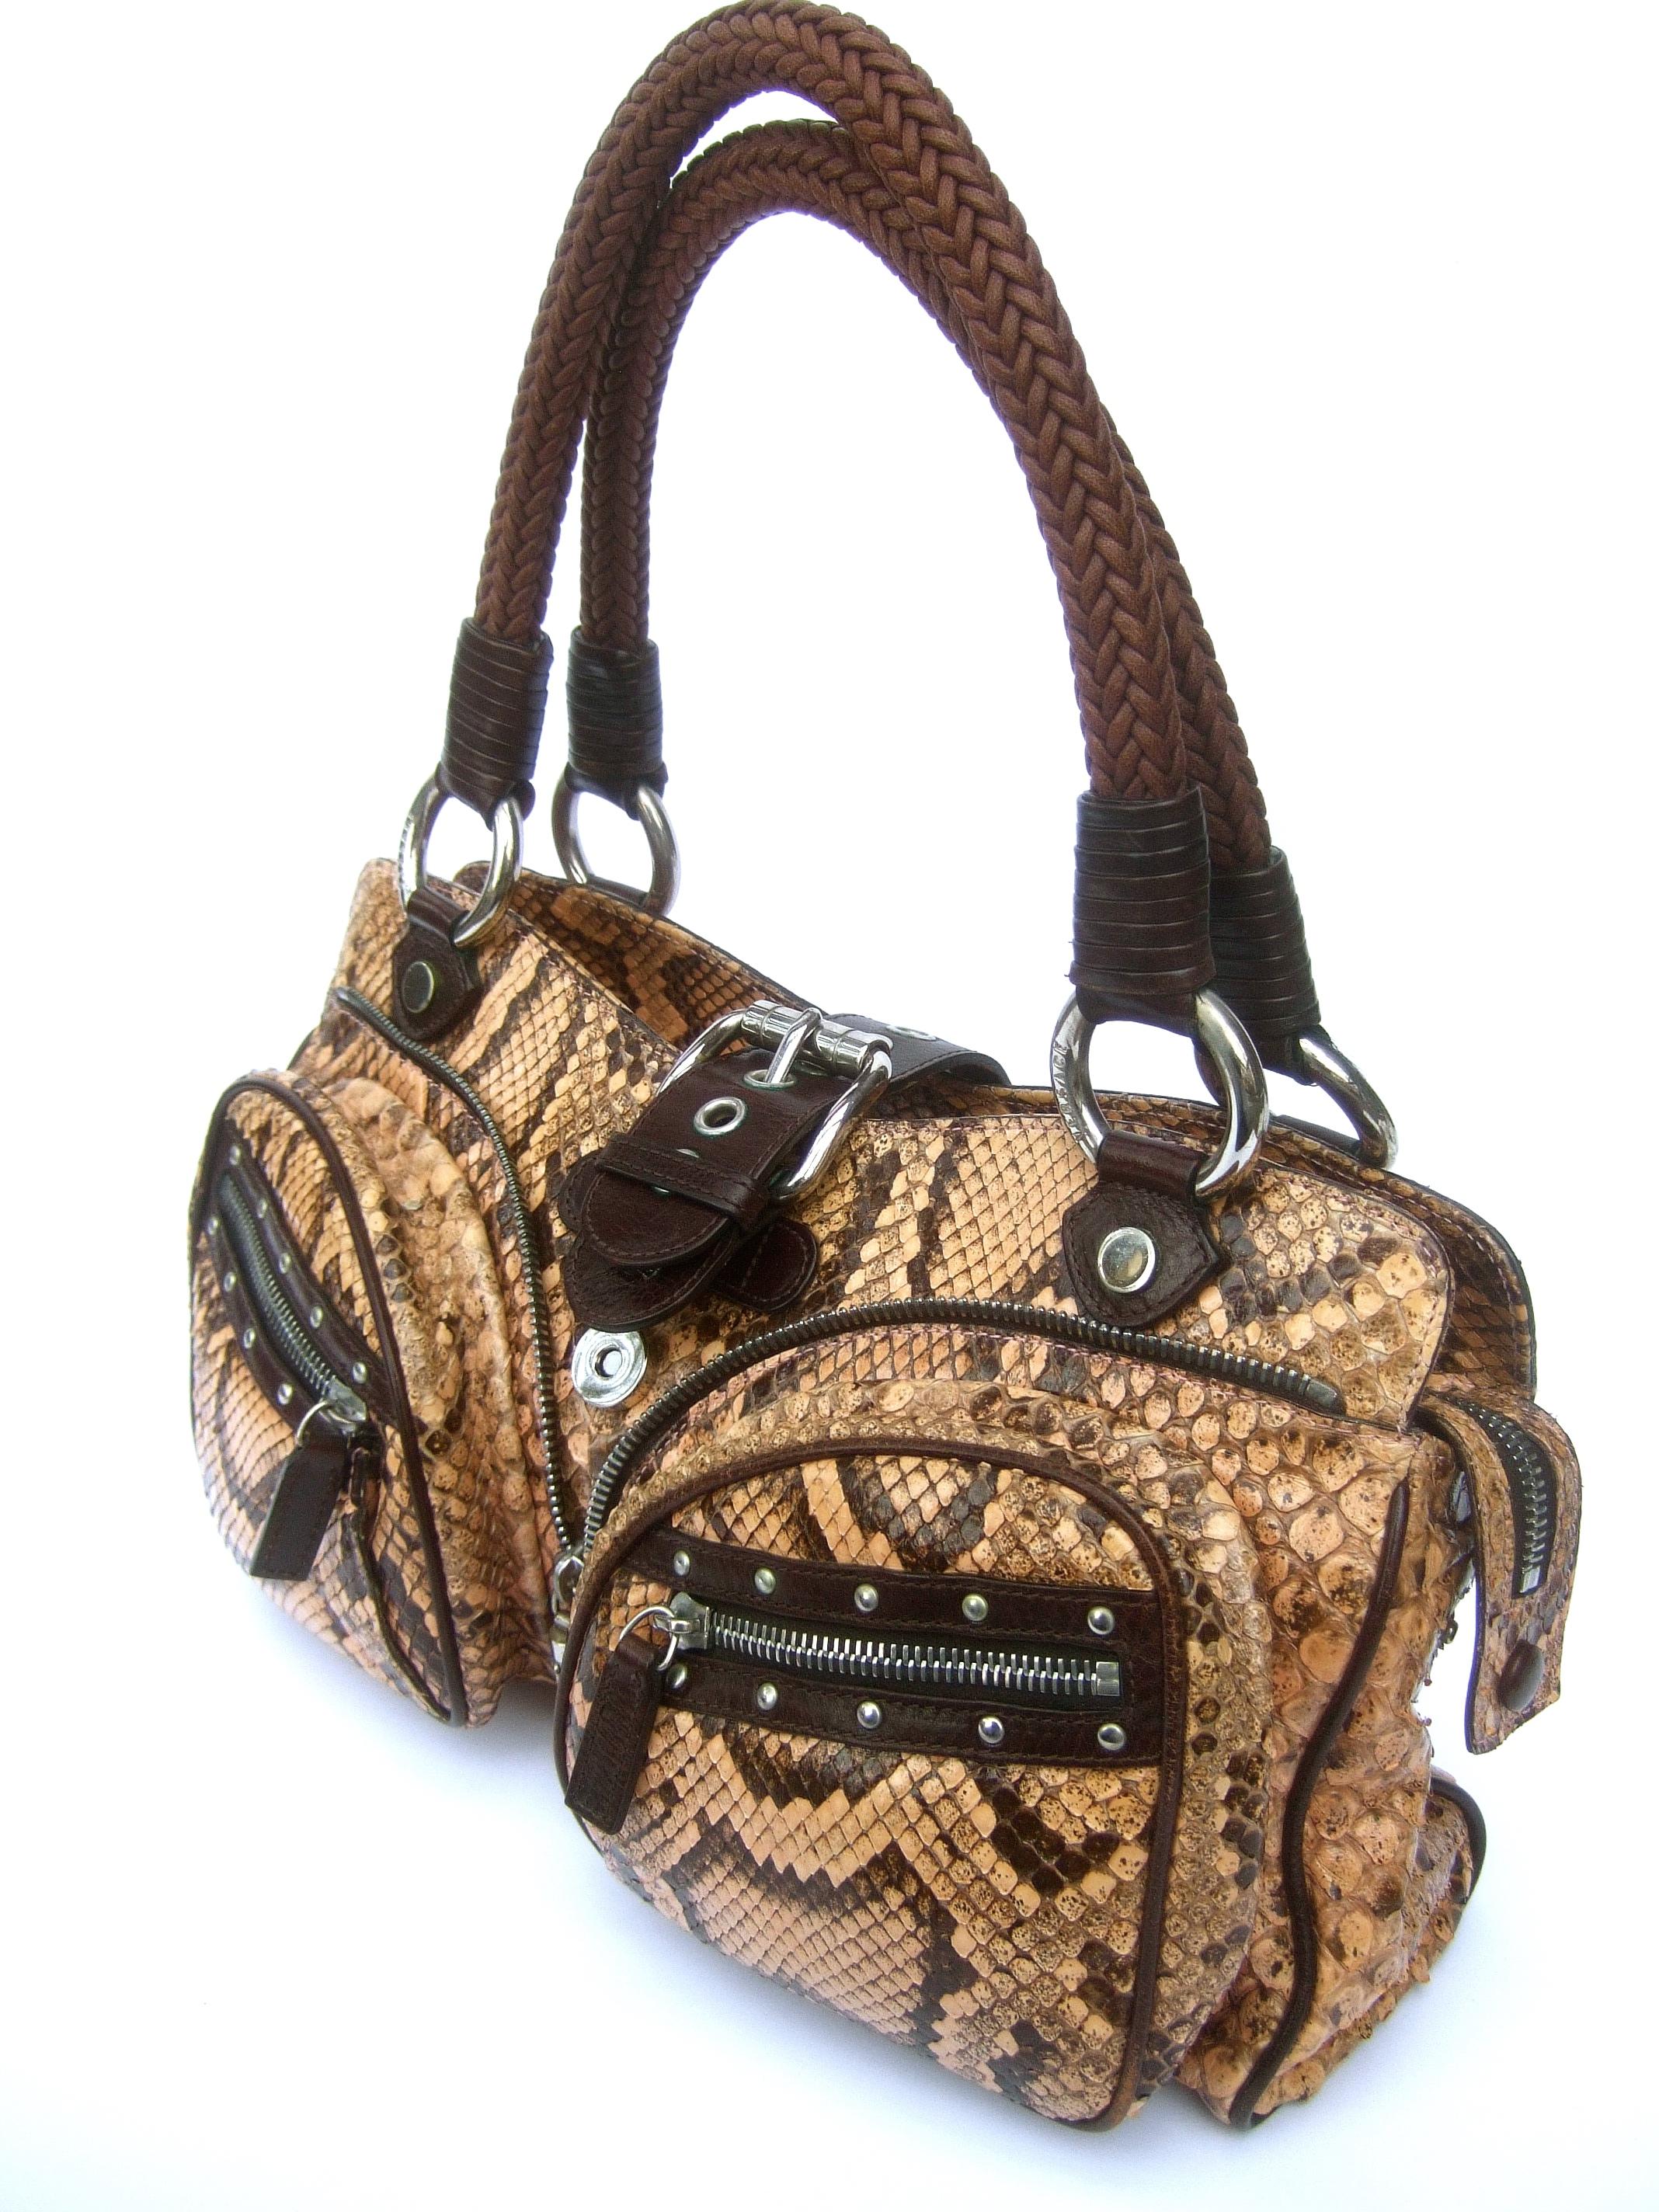 Versace Exotic snakeskin leather trim handbag c 1990s
The stylish Italian handbag is constructed with snakeskin
 Accented with two zippered pouch compartments 
on the front exterior

Designed with a brown leather silver buckle snap clasp mechanism